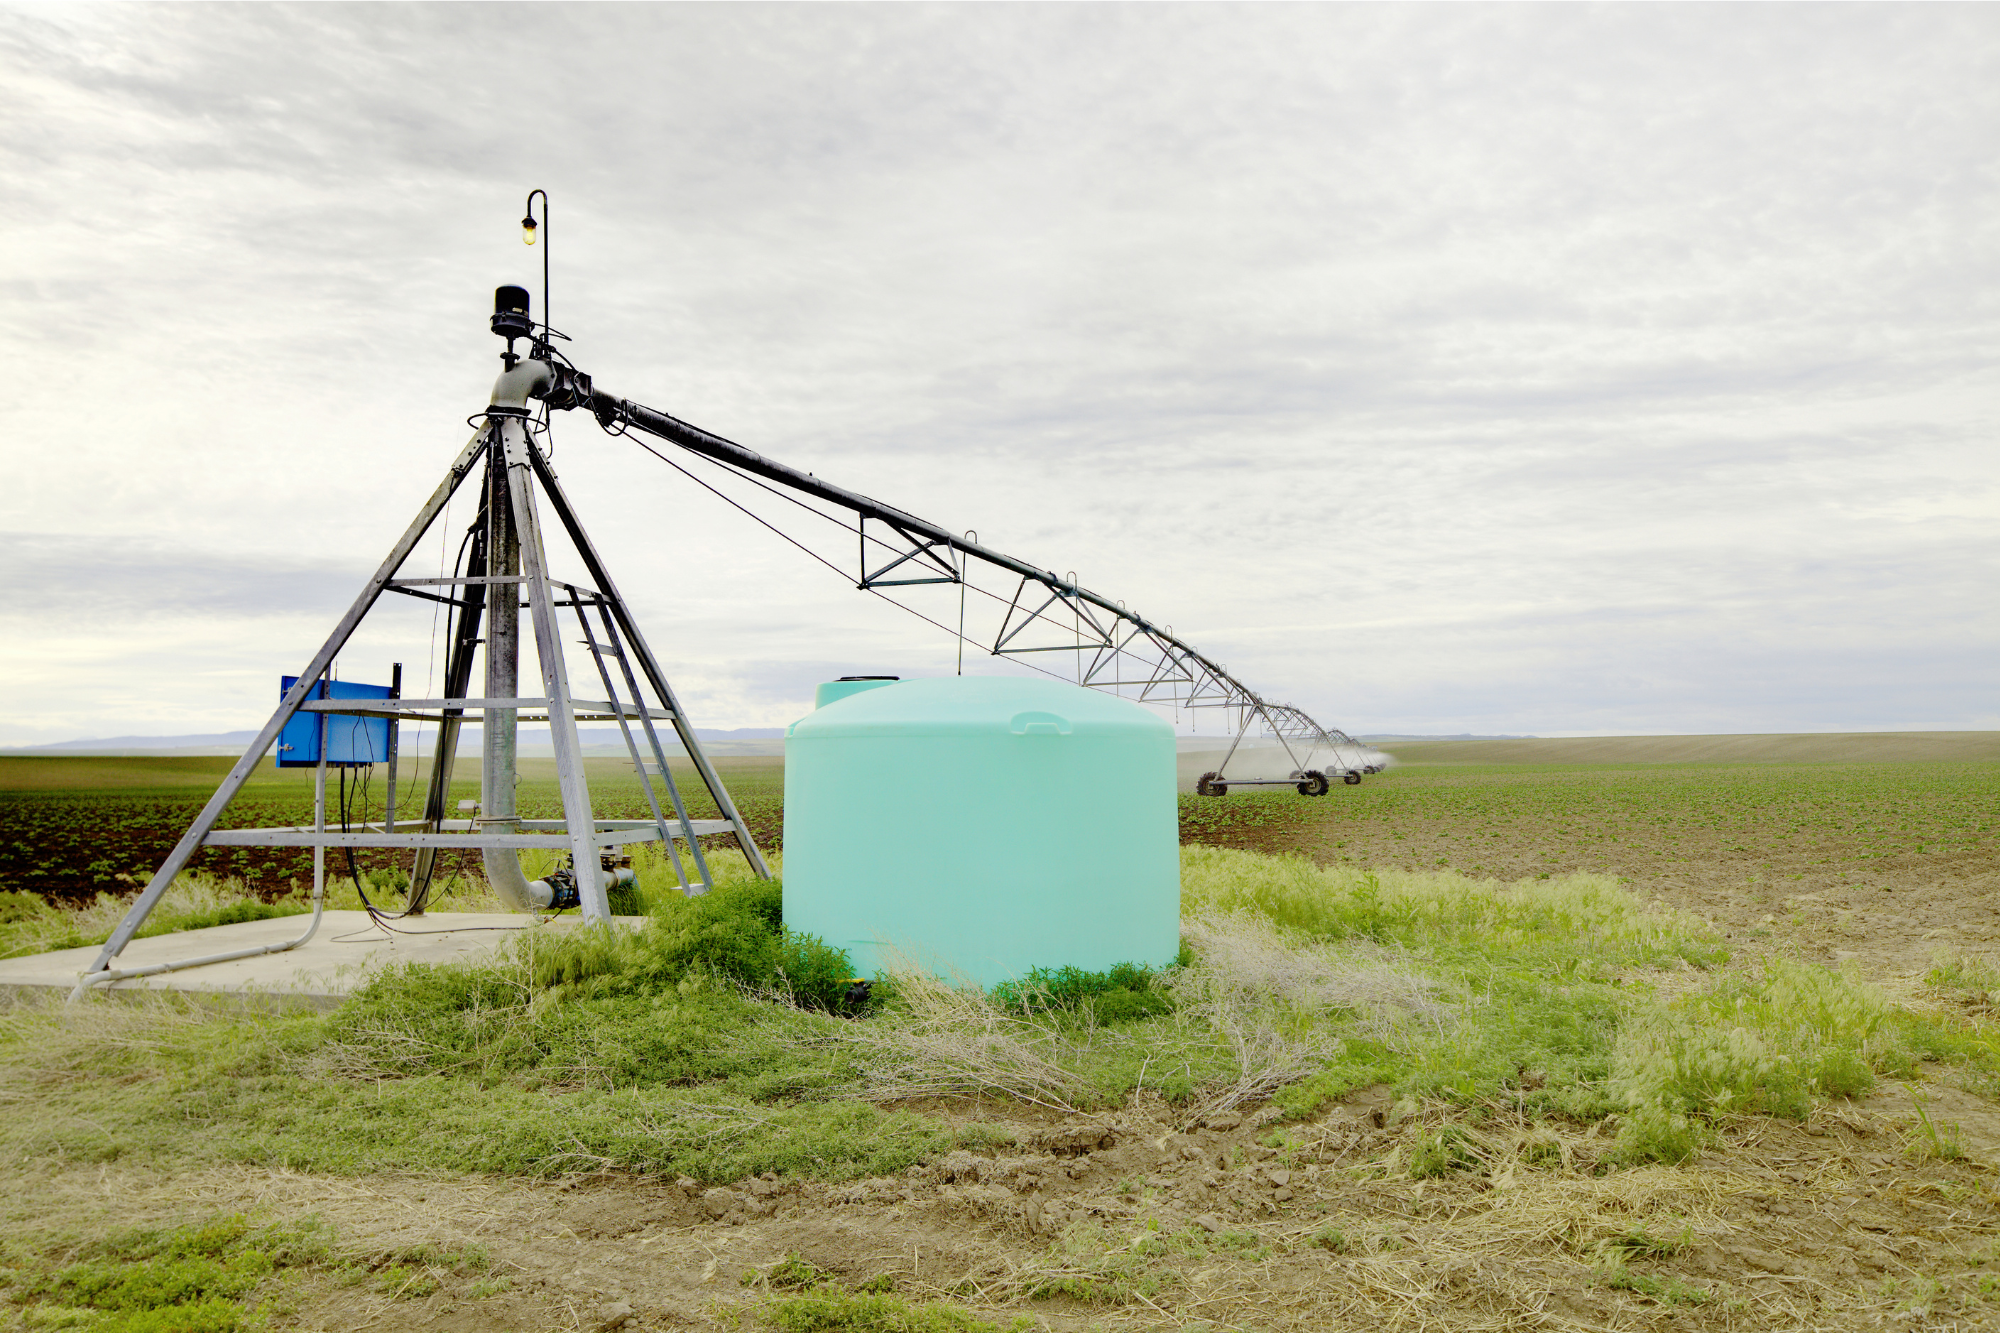 Irrigation system with a fertilizer tank mixing chemicals into water for fertigation